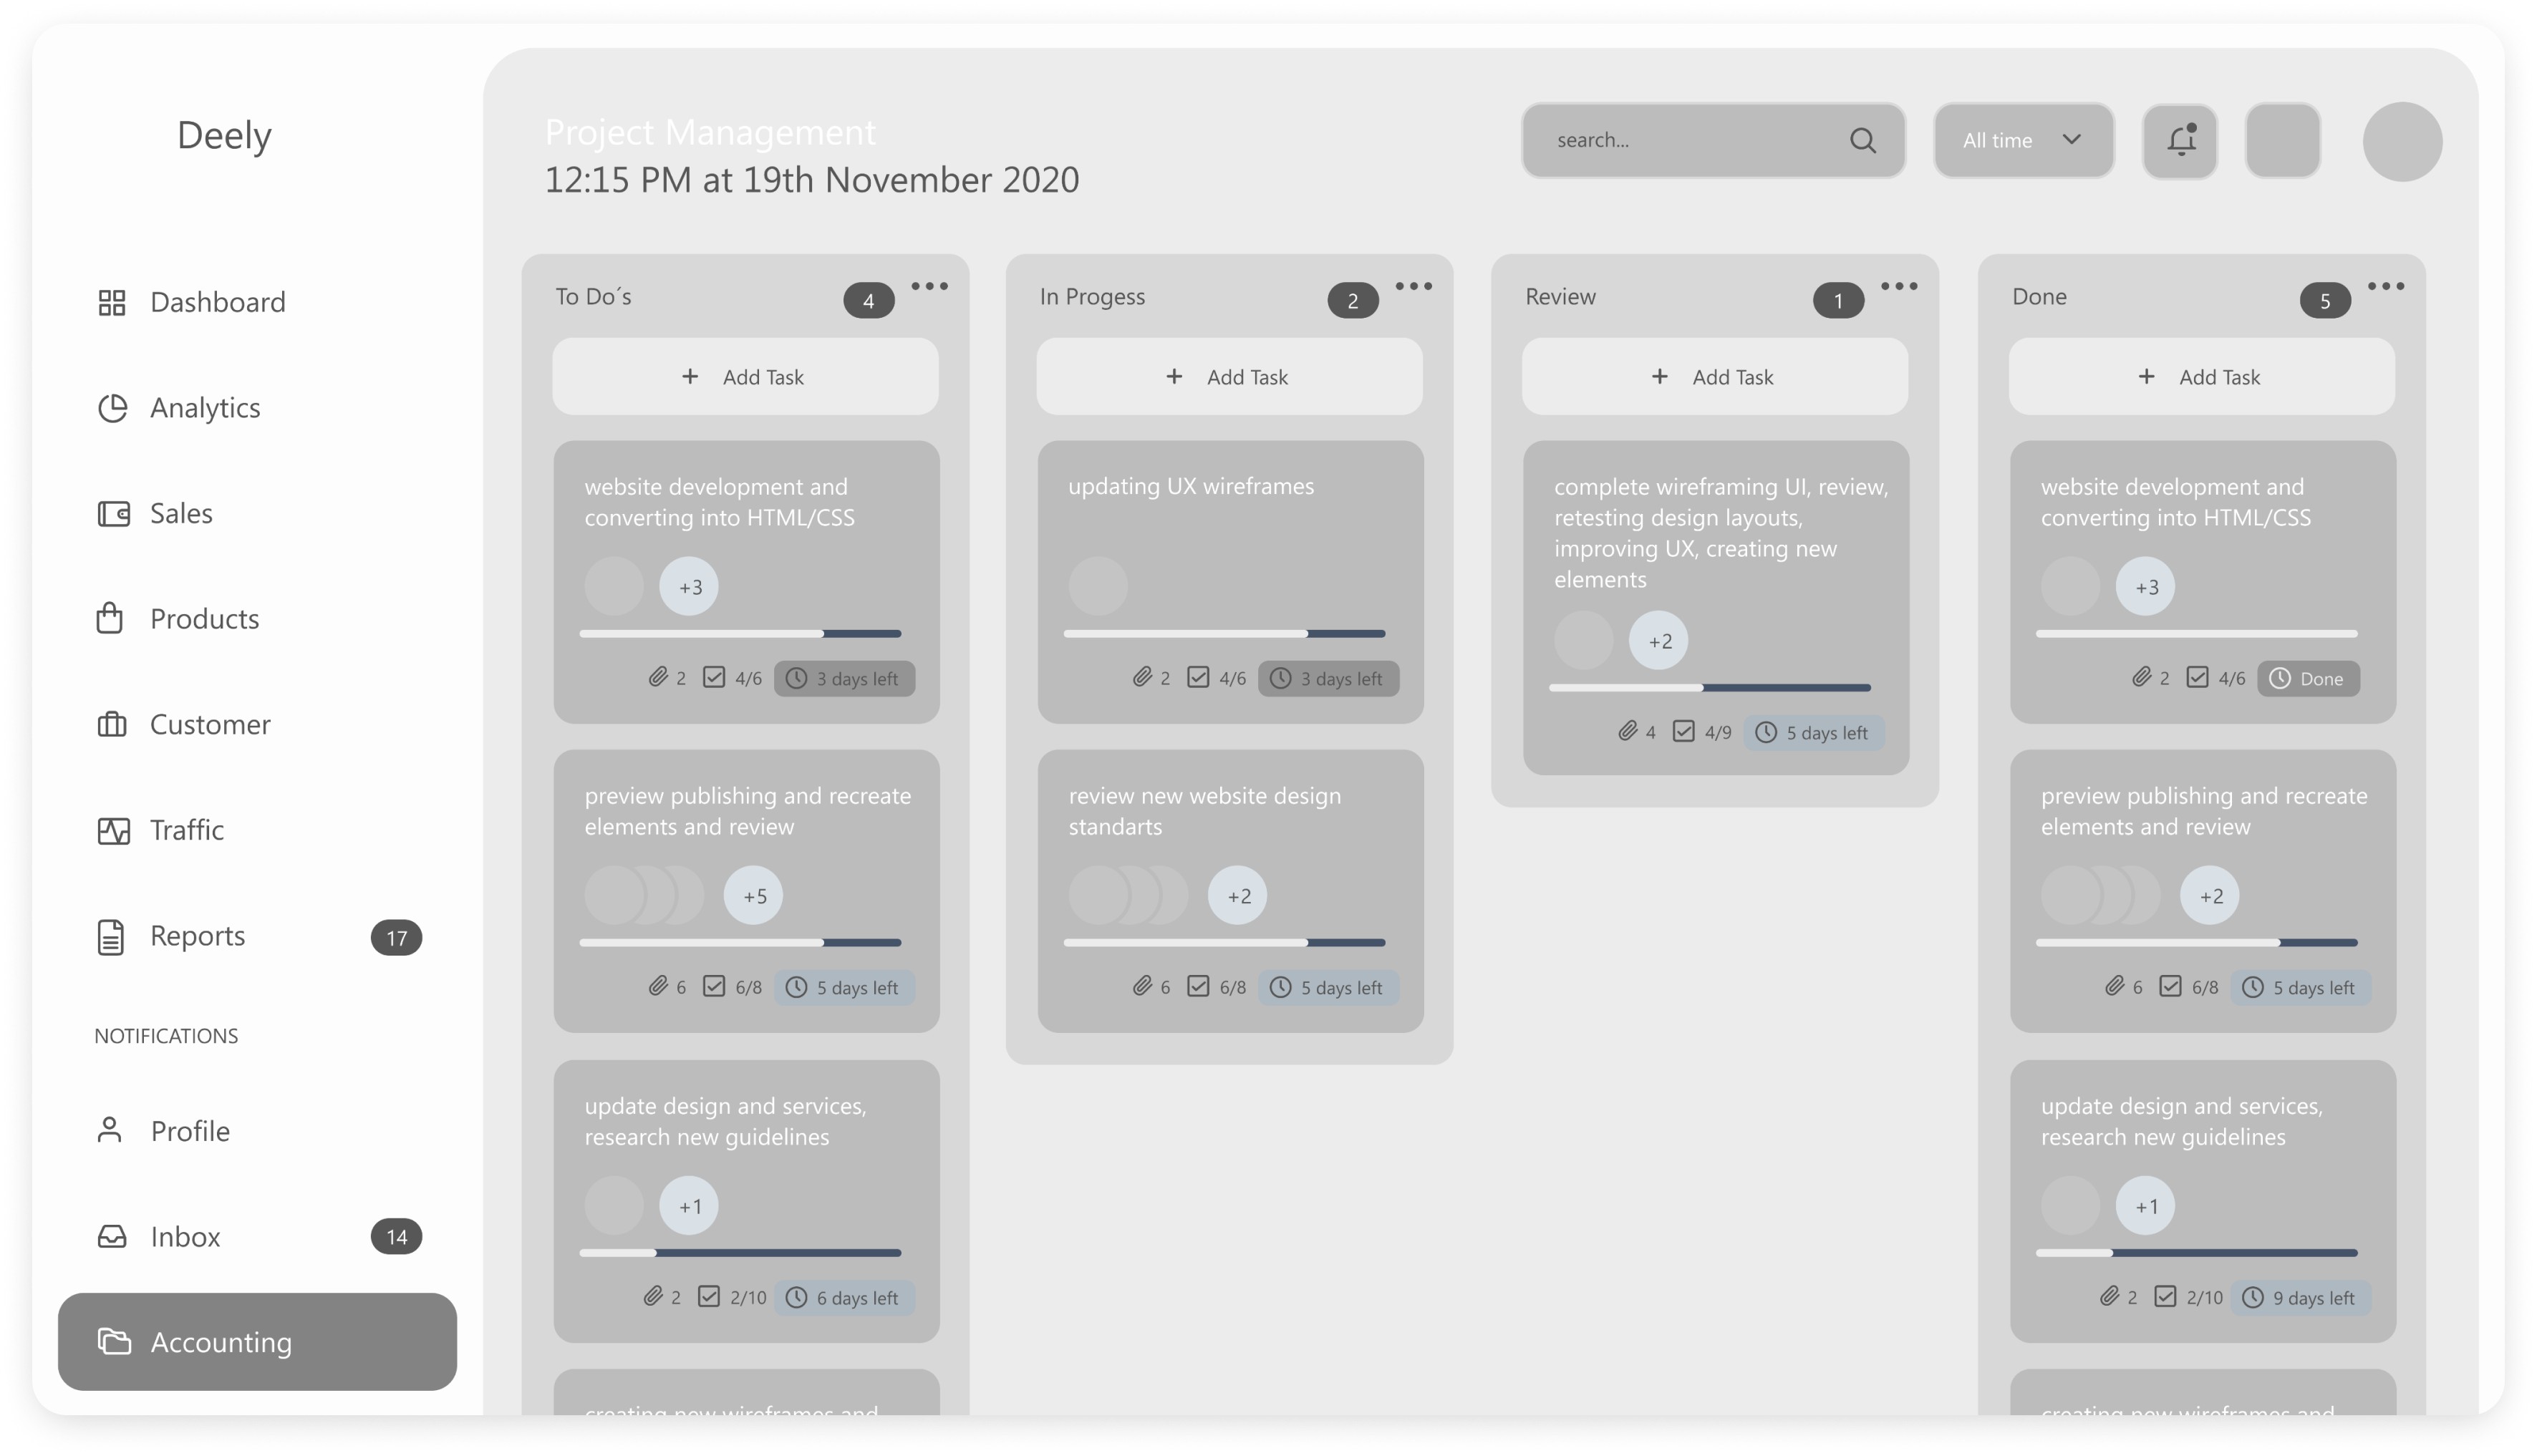 Wireframe of Deely project management dashboard screen